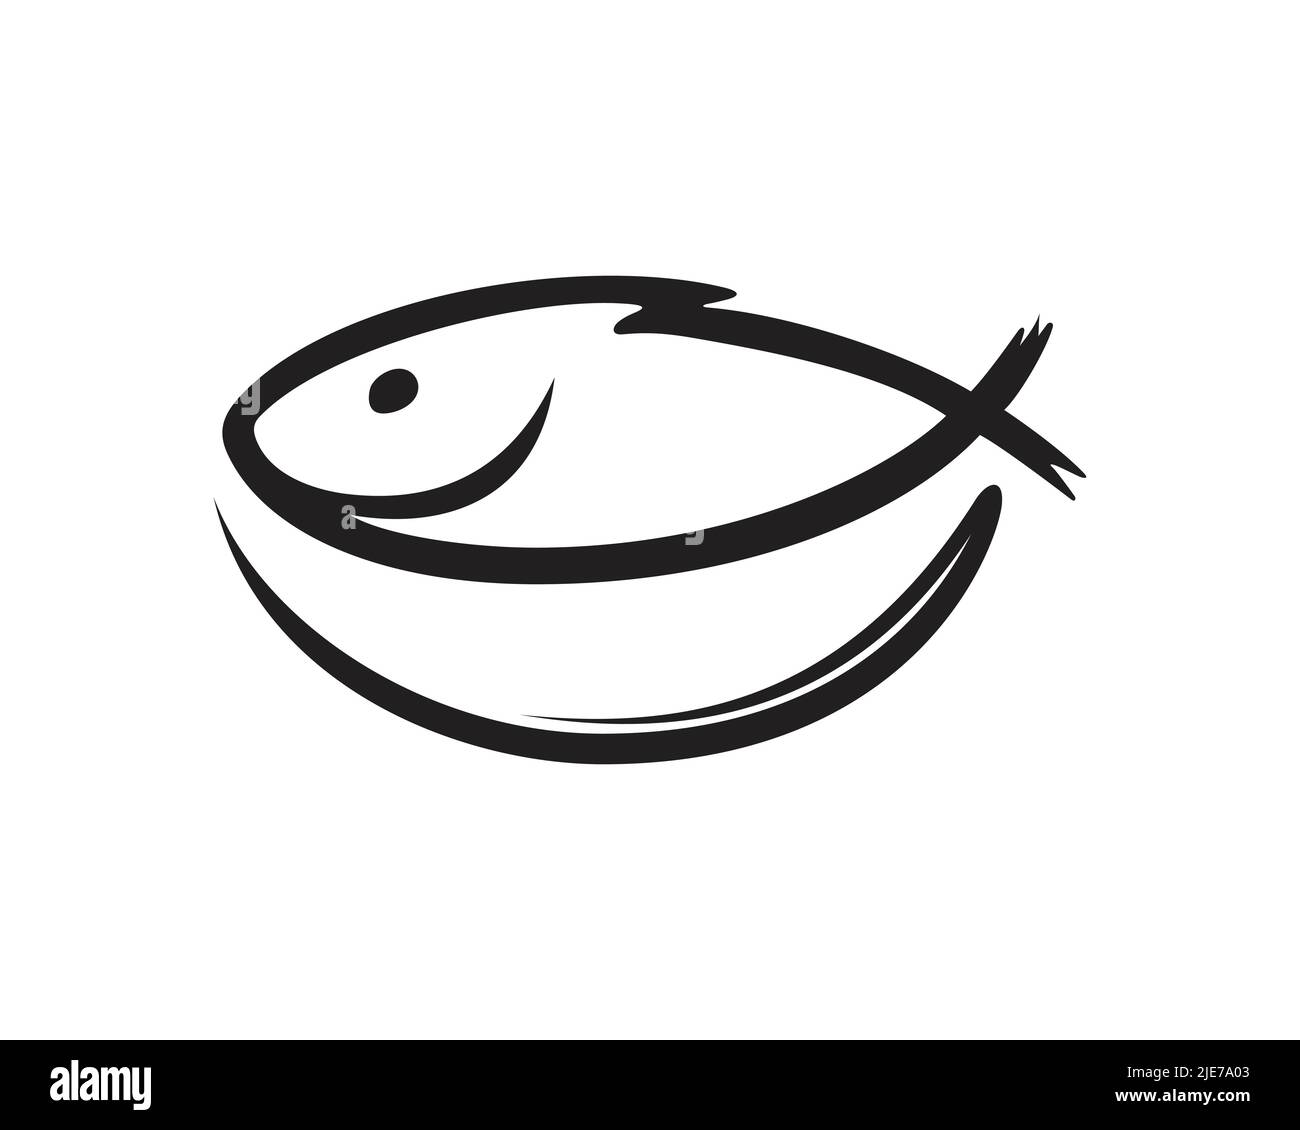 Fish combined with Bowl visuaIized with Silhouette Style Stock Vector